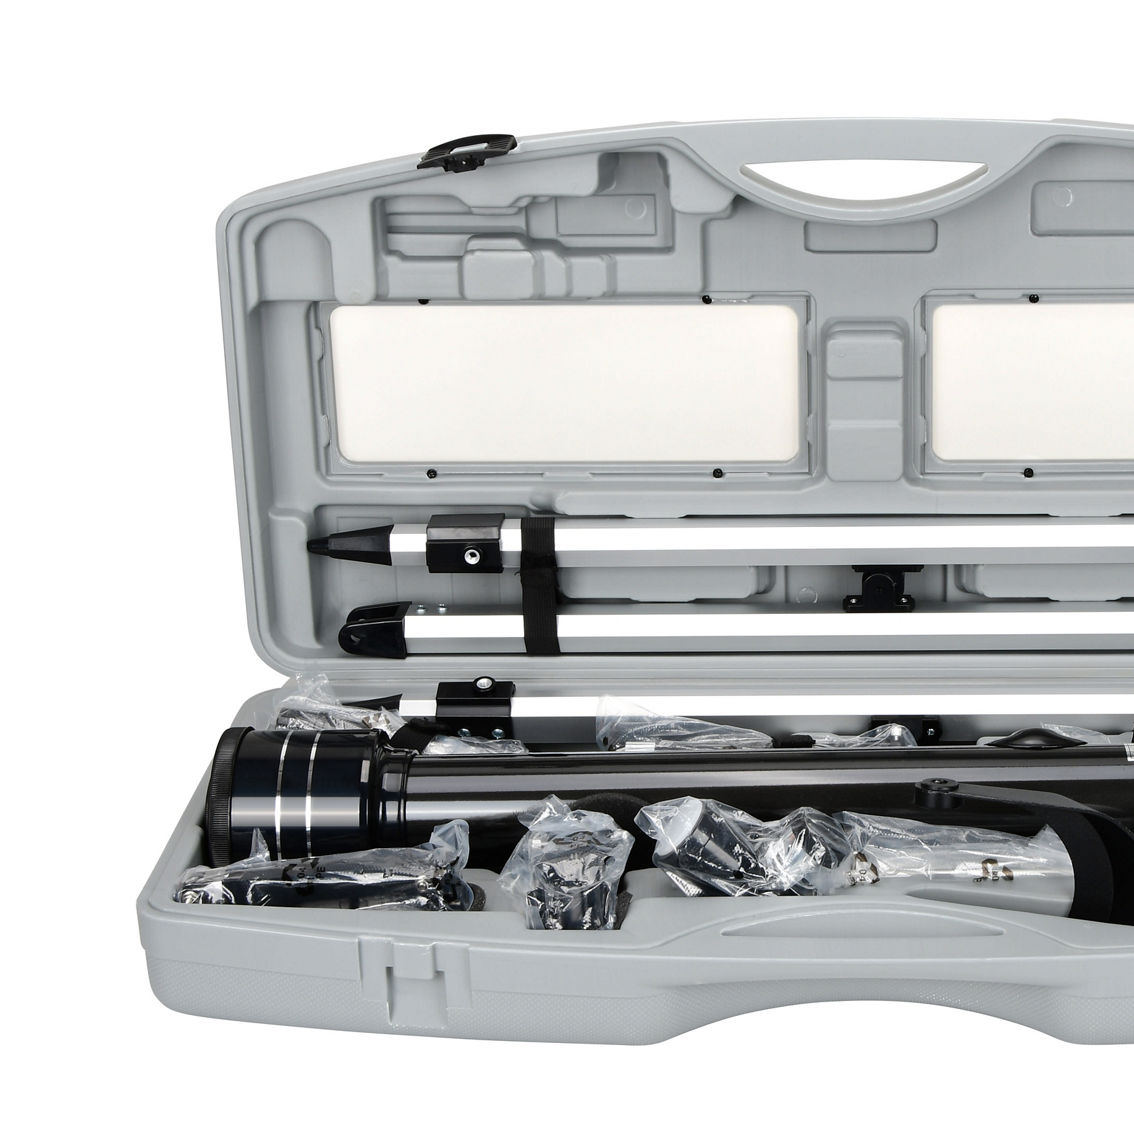 COLEMAN® 700x60 Refractor Telescope Kit with Heavy-Duty Carrying Case - Image 5 of 5